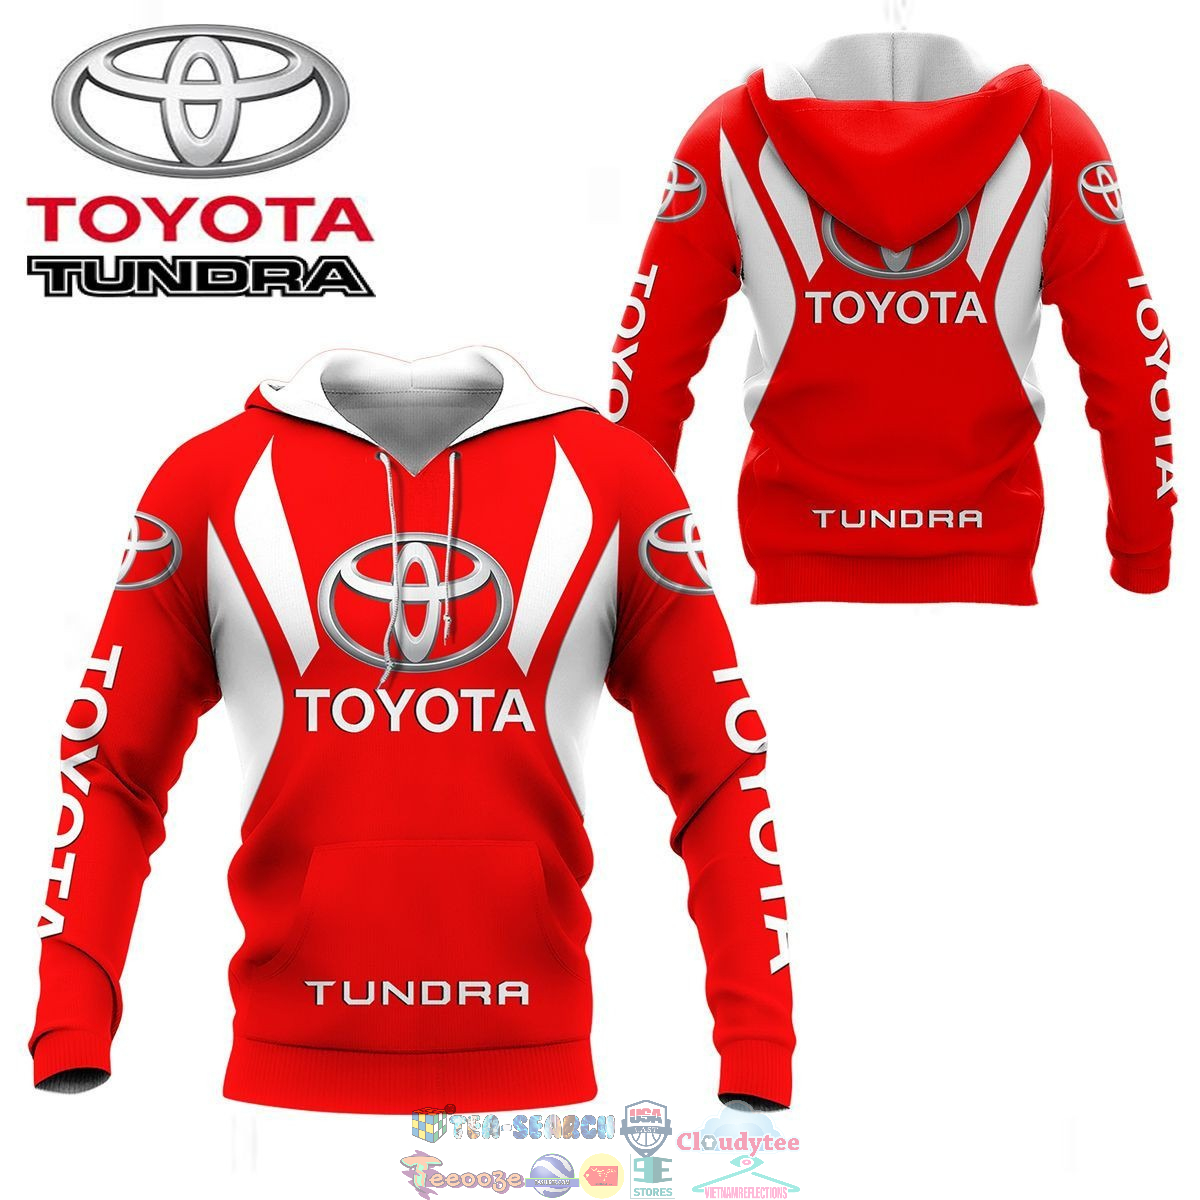 Toyota Tundra ver 23 3D hoodie and t-shirt